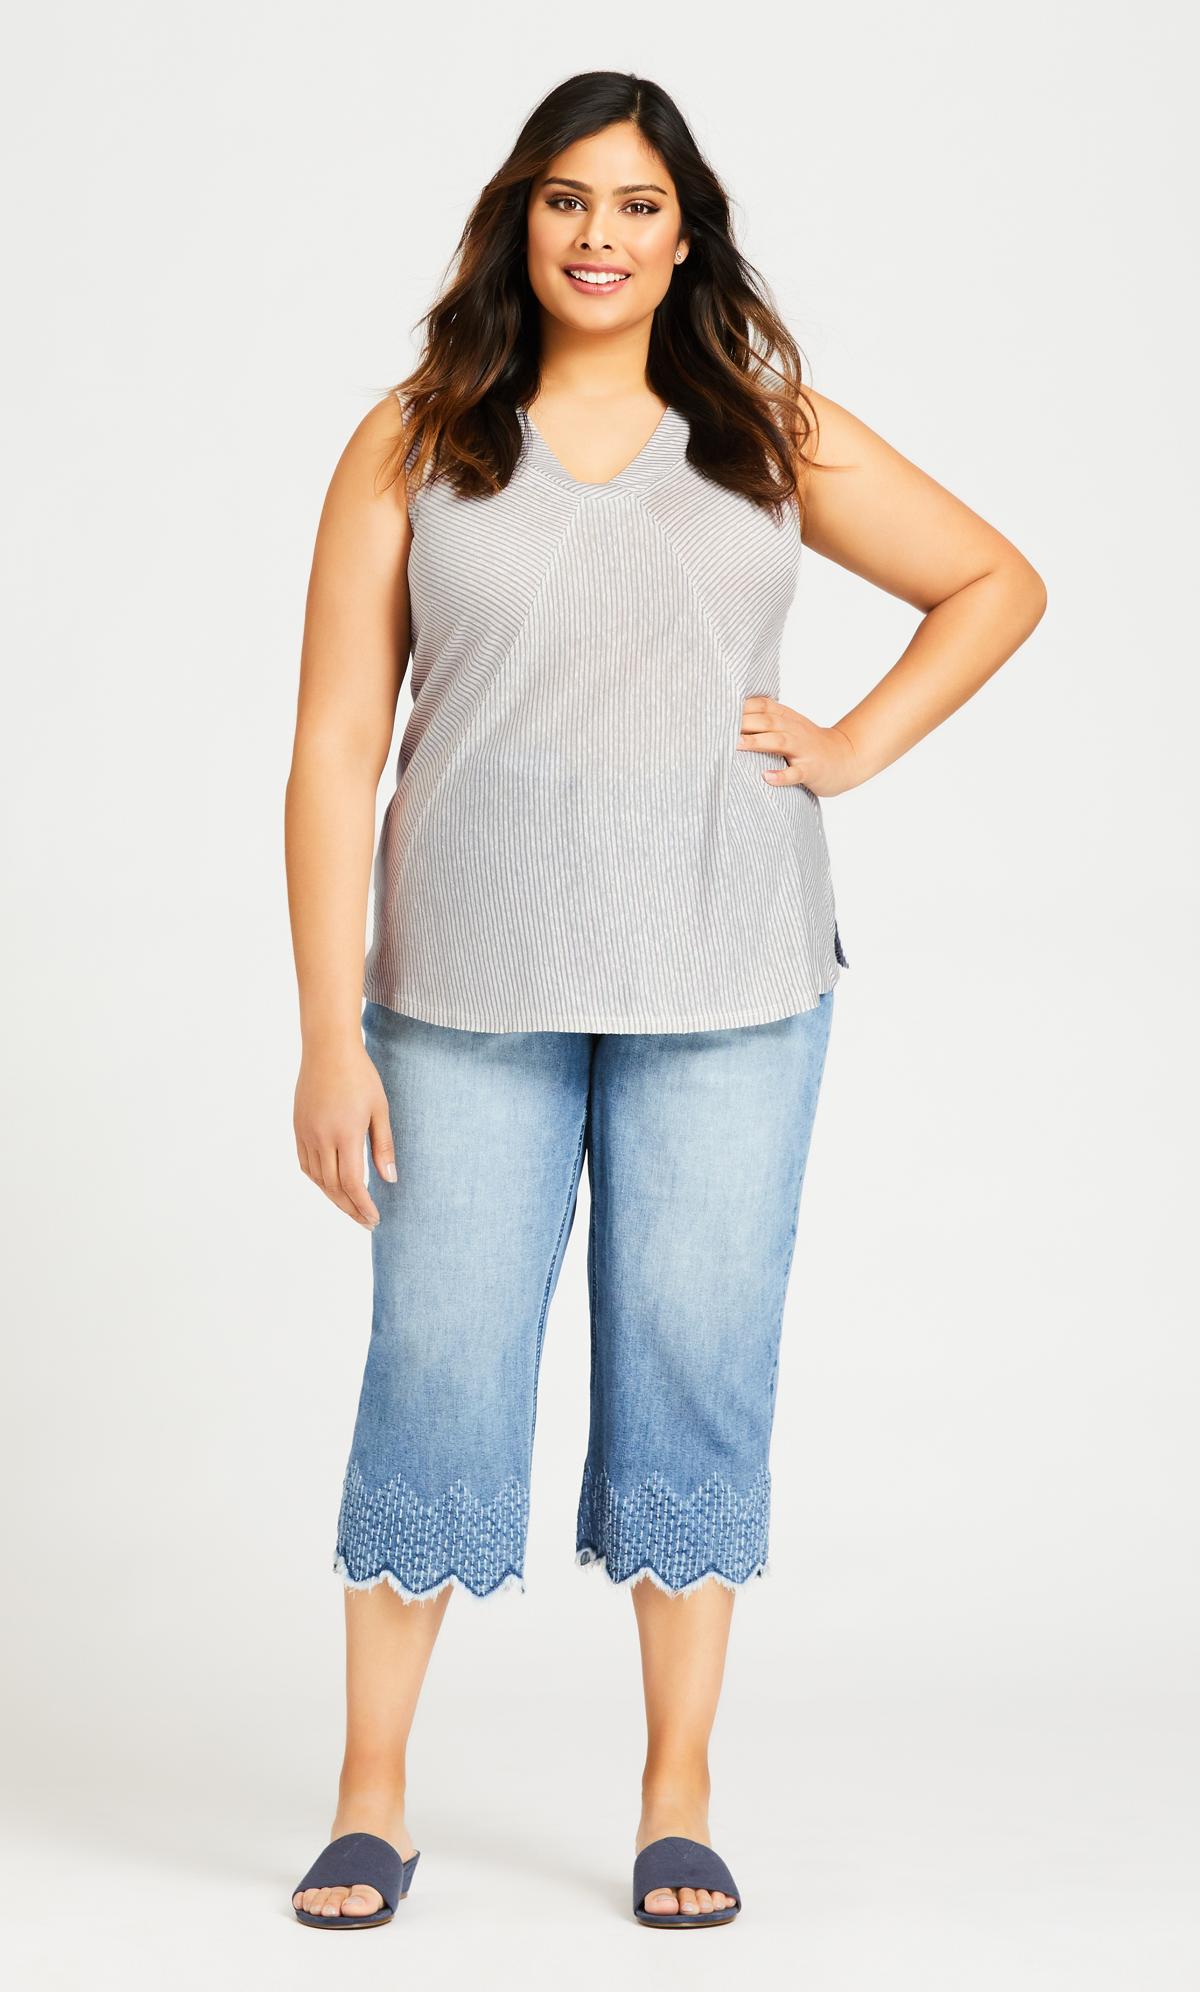 Inverted V Sleeveless Charcoal Top 1